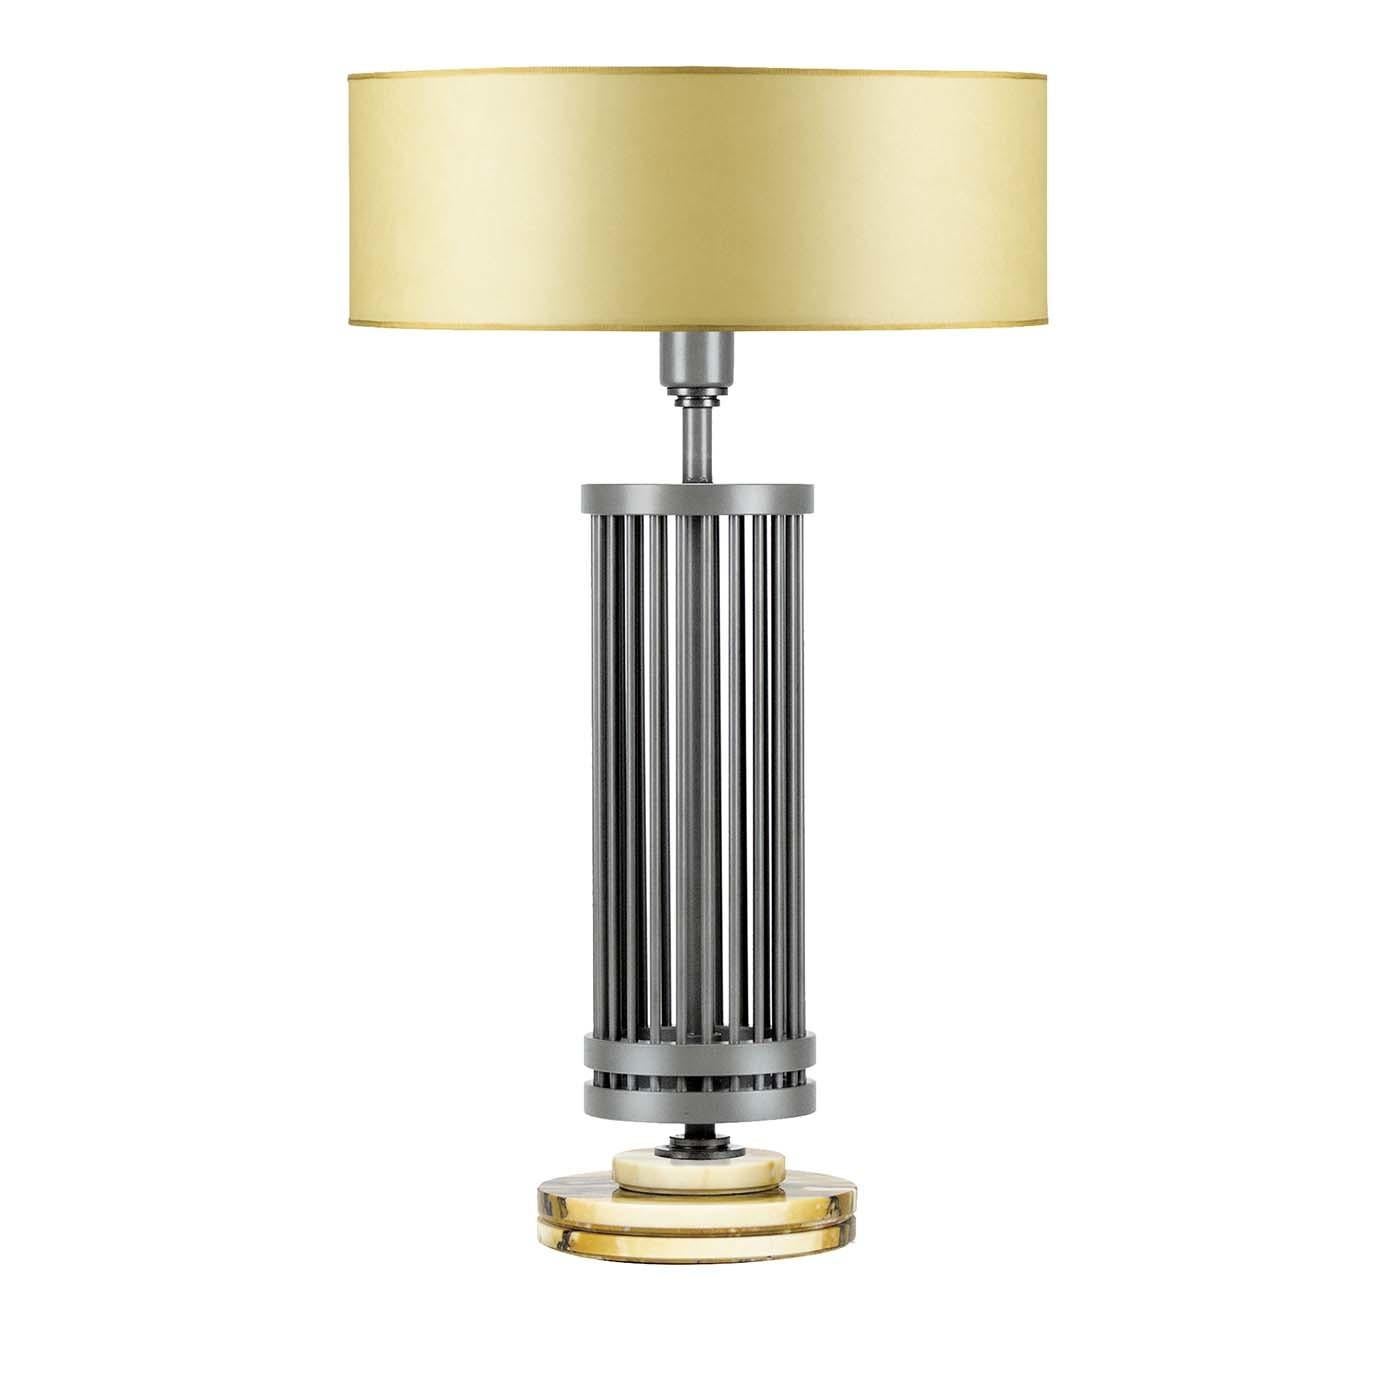 From the master suite to the living room, this stunning table lamp is a sure way to brighten up any interior while adding style and elegance to any decor. Raised on a stunning circular base of Giallo Siena marble whose light and dark yellow veins